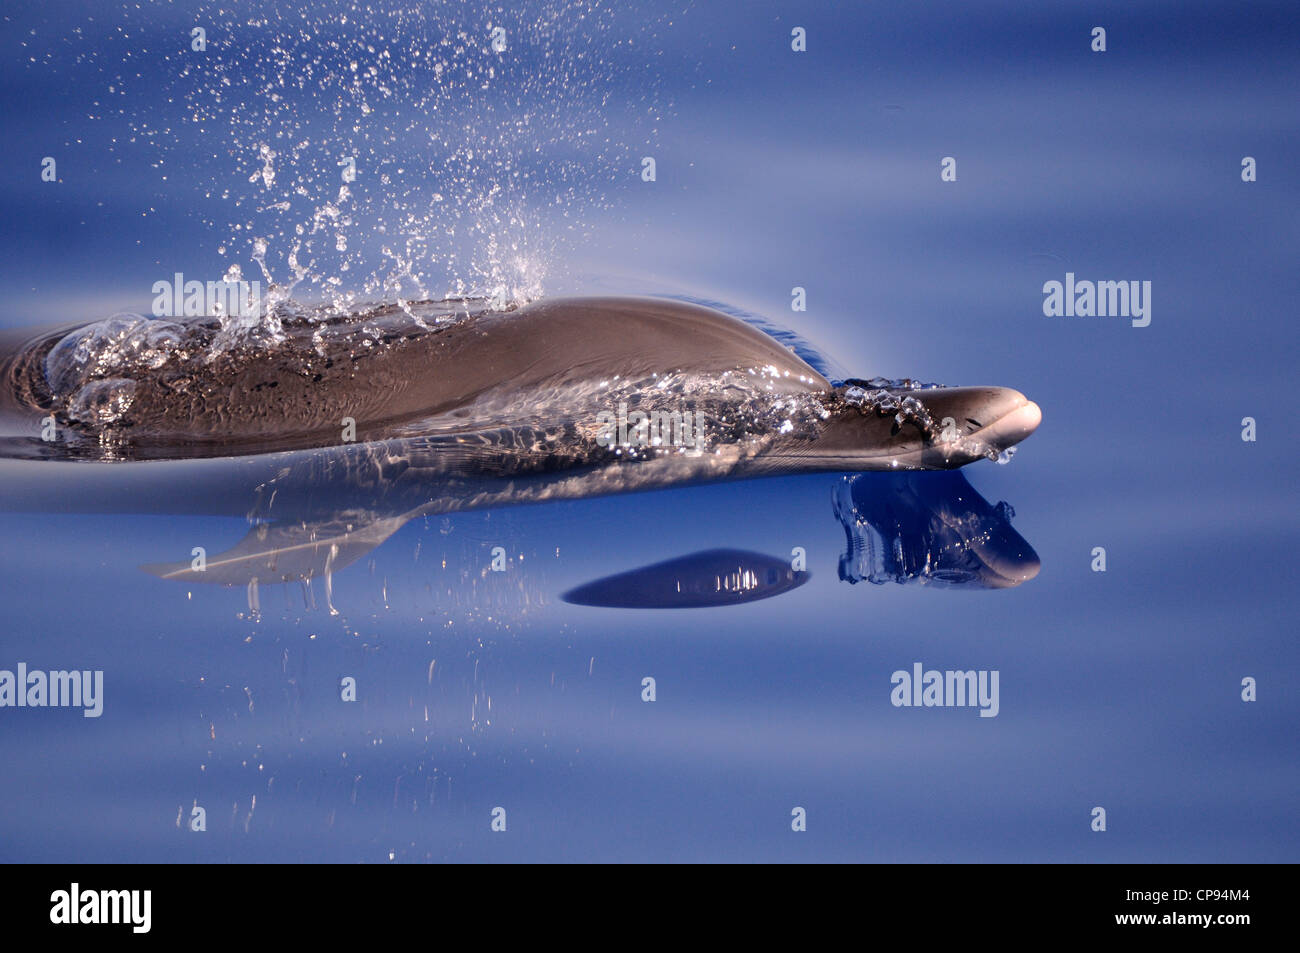 Pantropical Spotted Dolphin (Stenella attenuata) breathing at surface, The Maldives Stock Photo